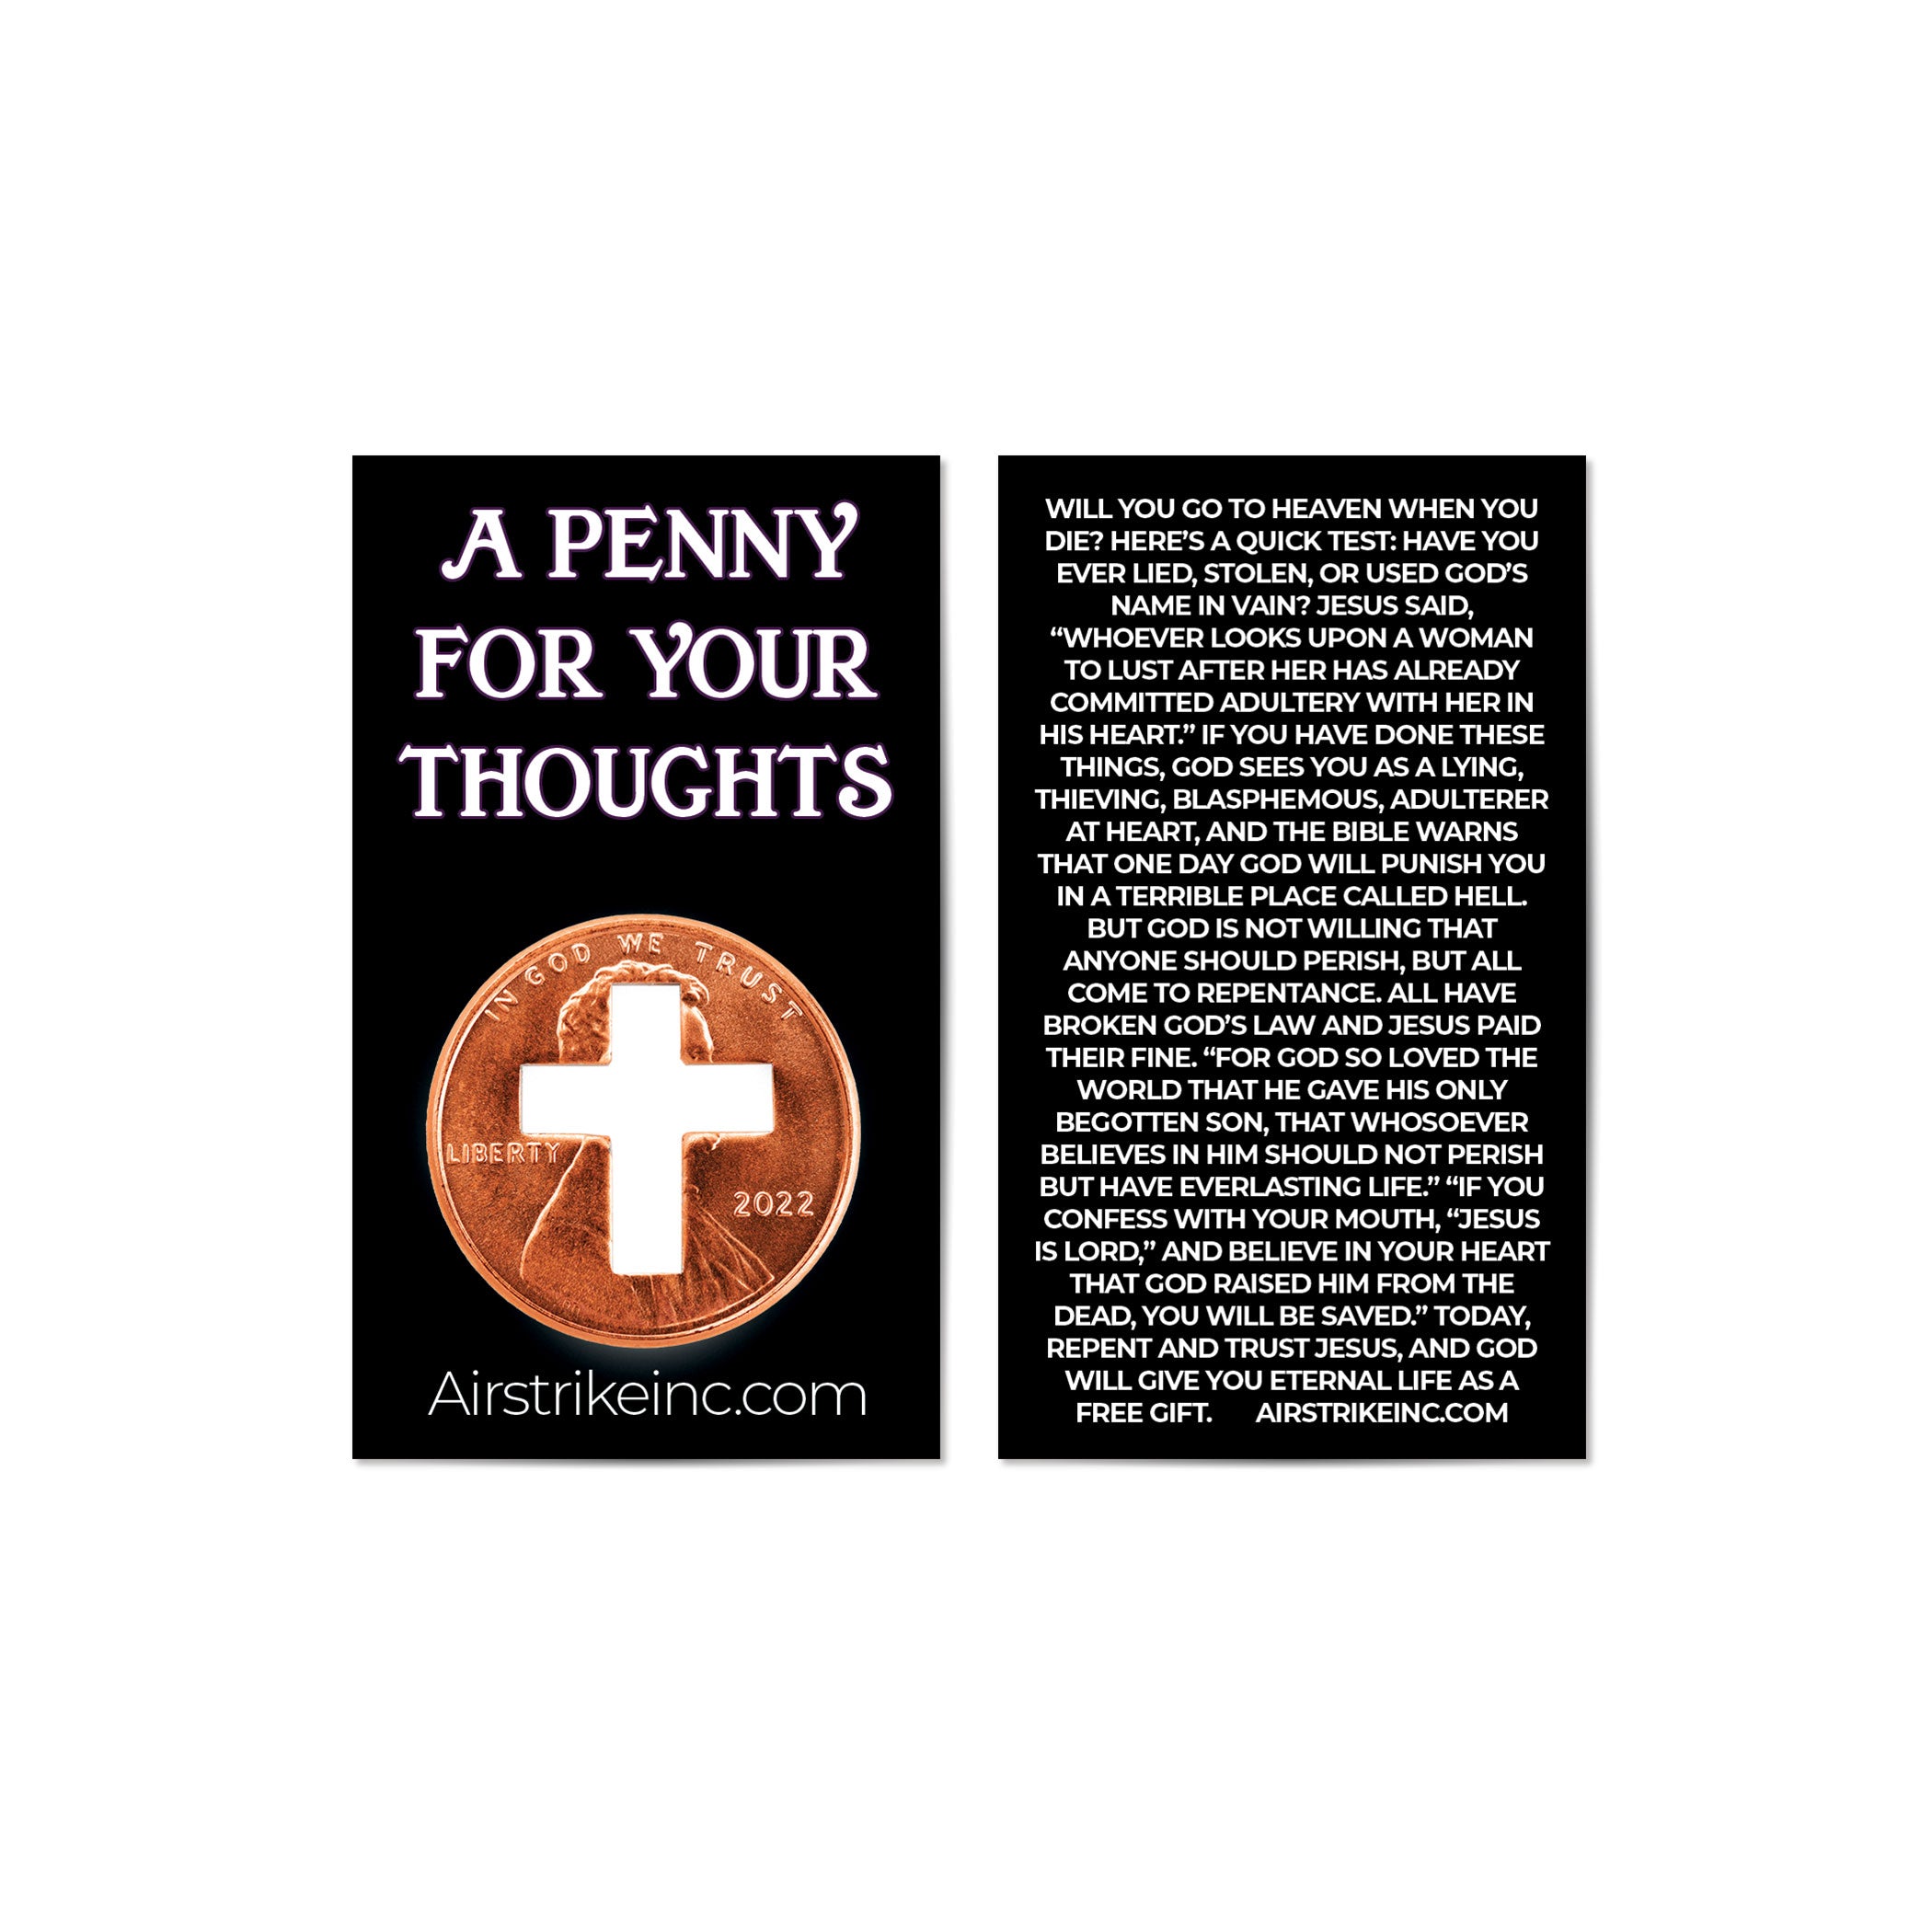 Cross Pennies From Heaven Card - A Penny For Your Thoughts